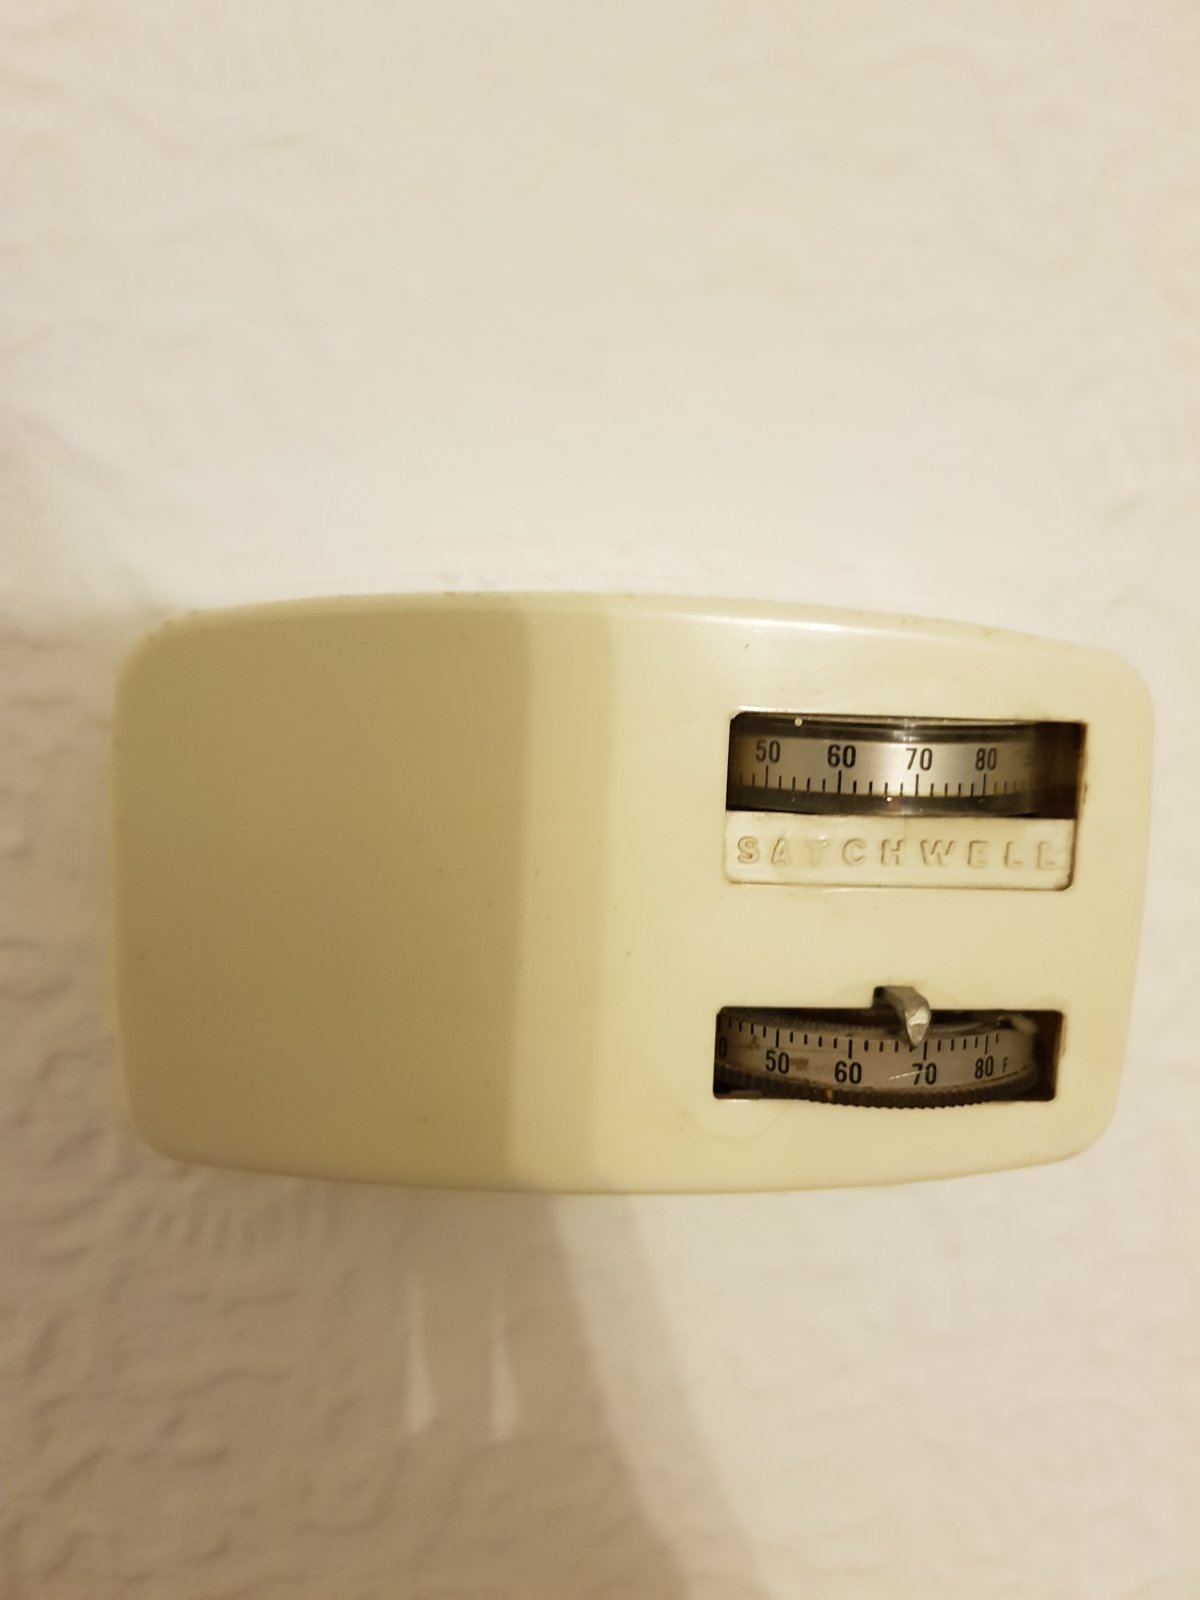 Satchwell Twin Boiler Thermostat TBD 2401 Contacts 3 